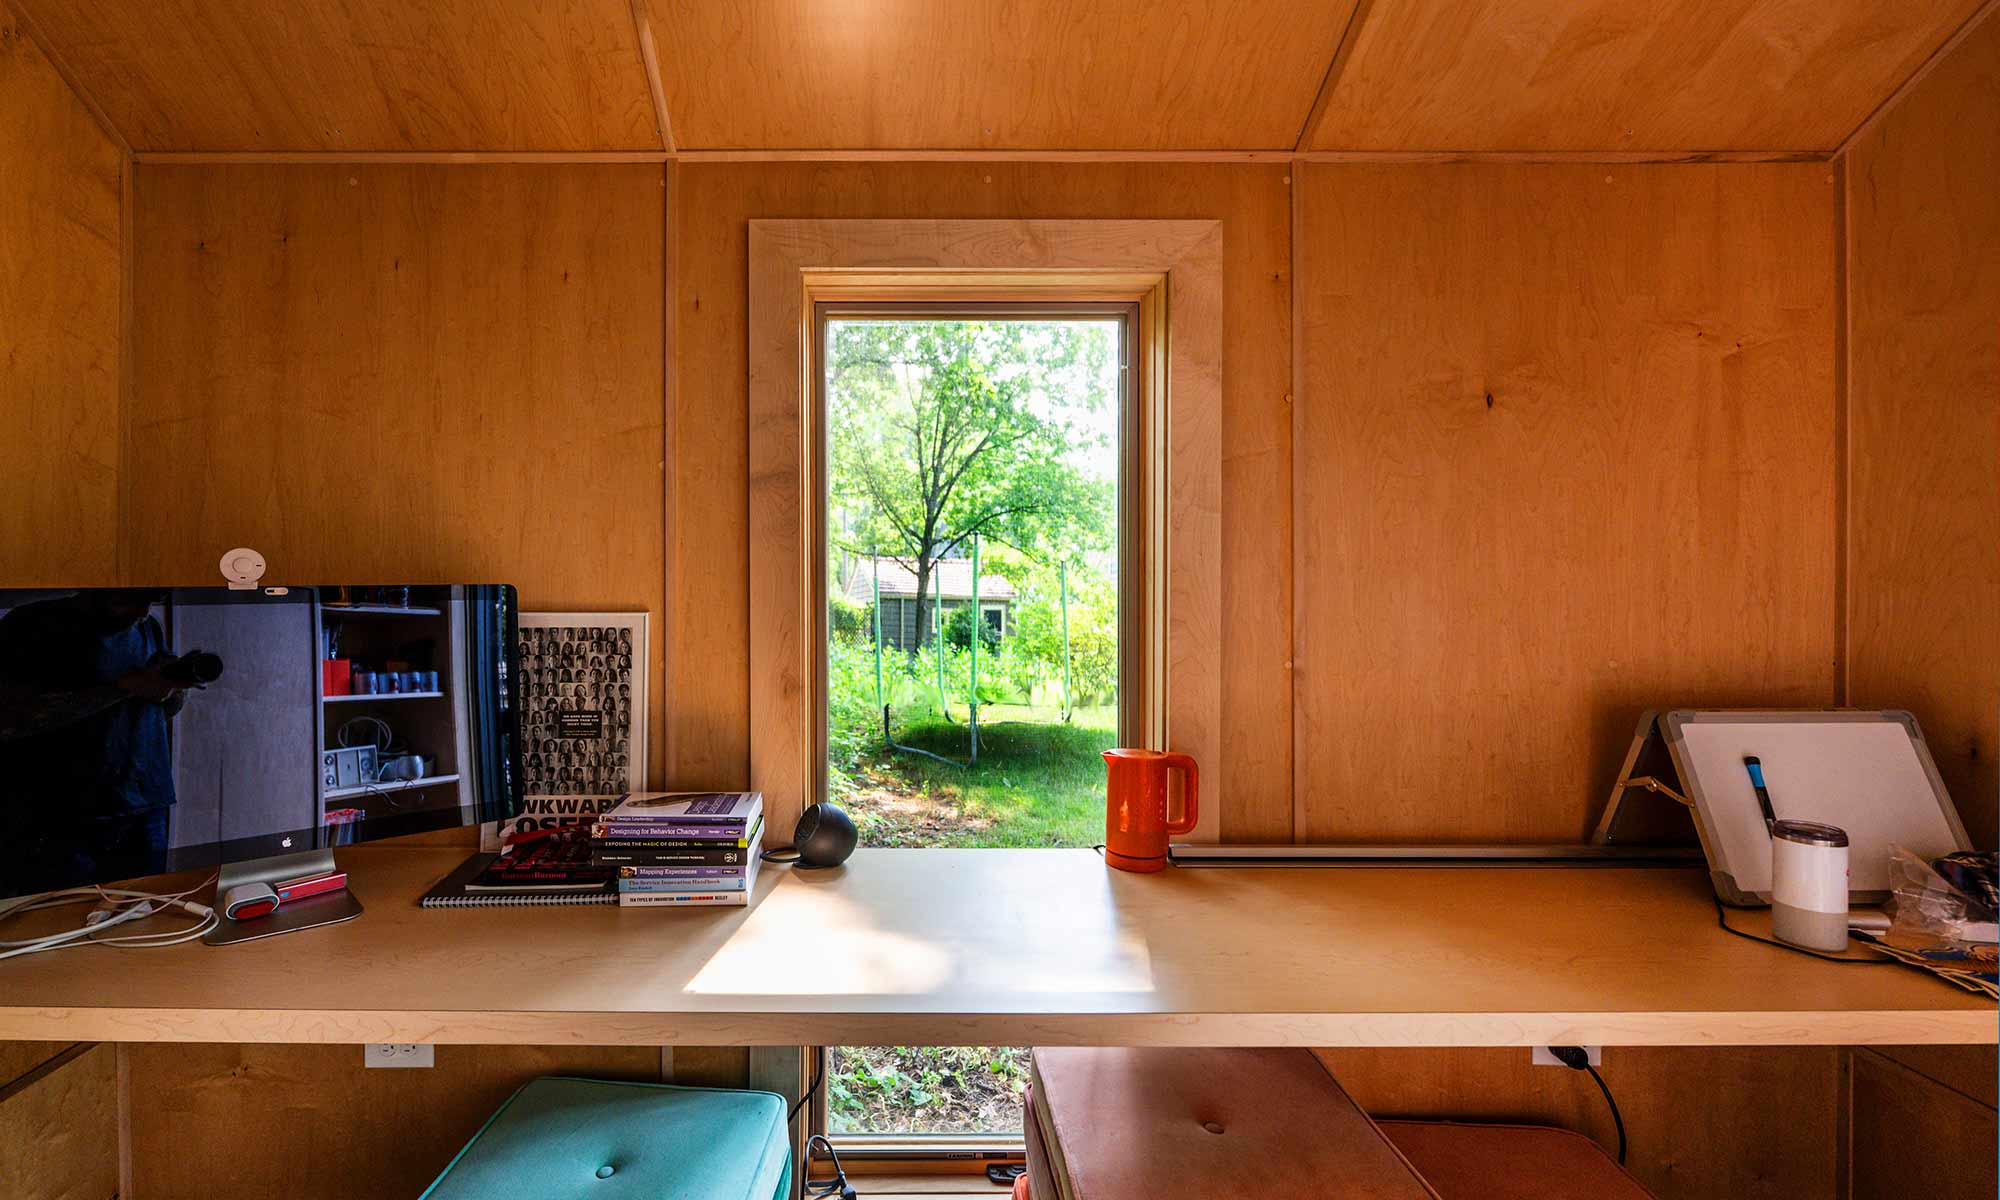 maple walls with builtin desk outdoor home office bunkie shed from interior looking out window over desk